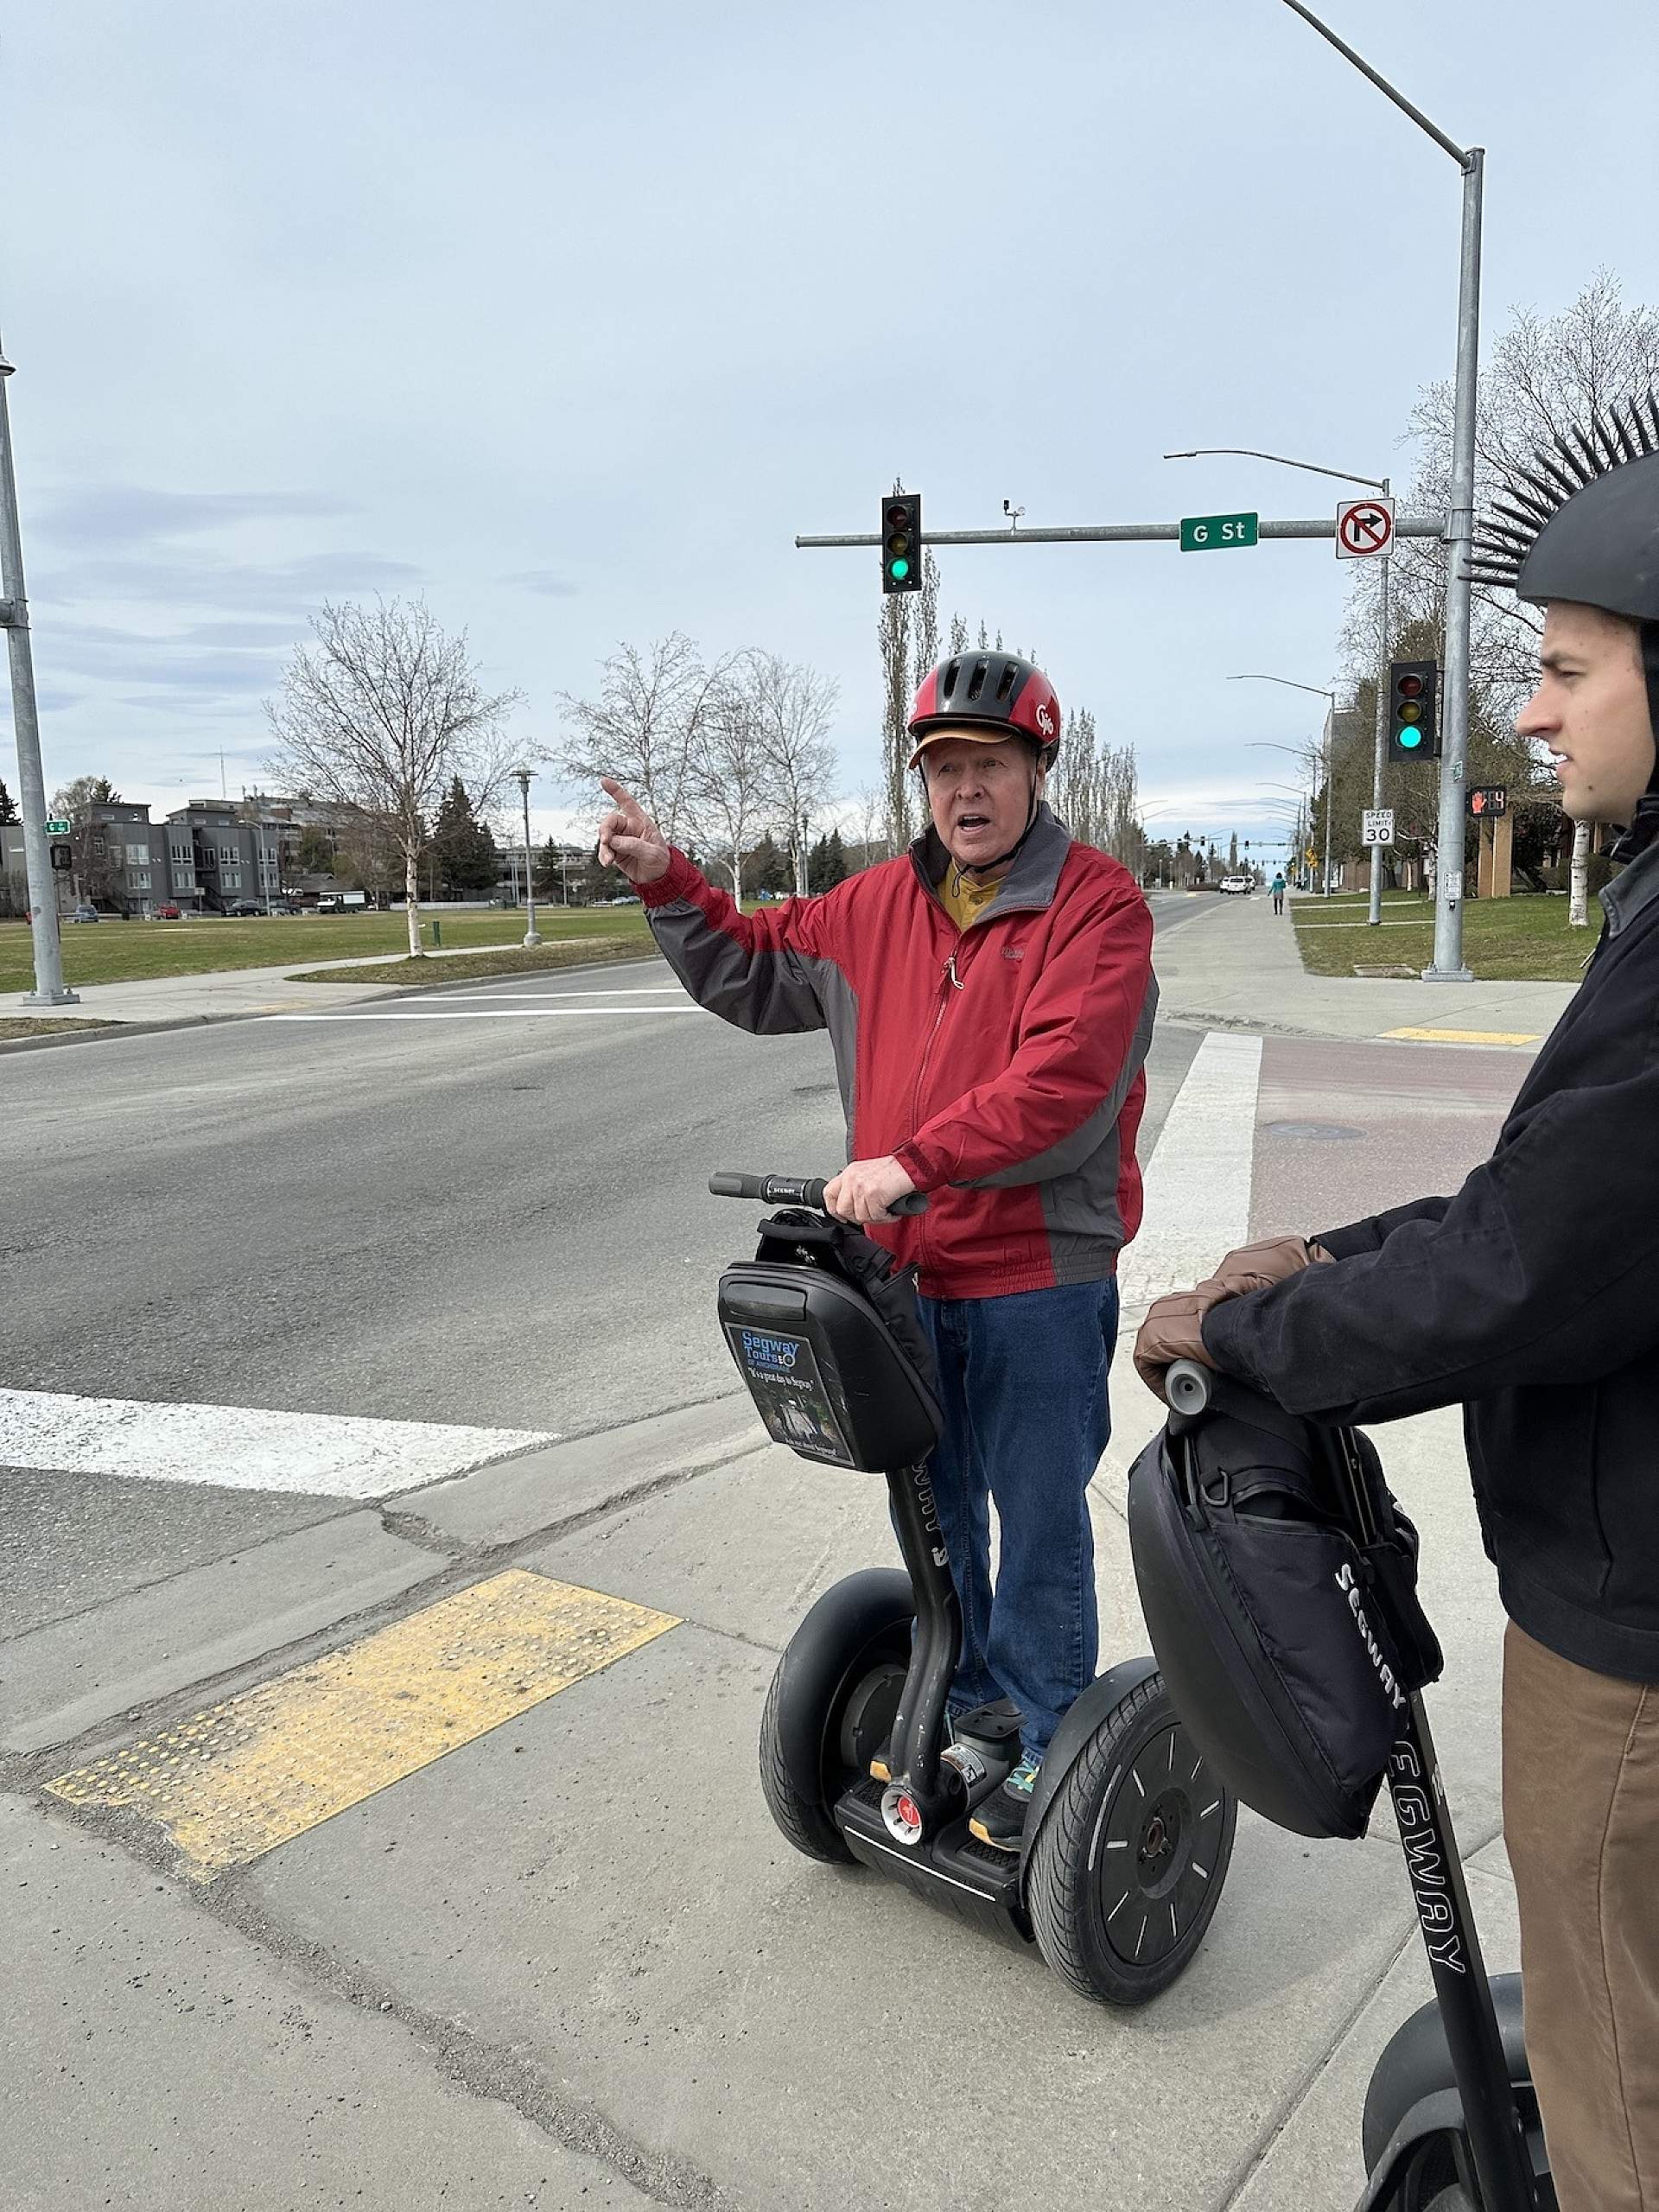 A group on a Segway tour waits at a busy street corner in Anchorage, Alaska.